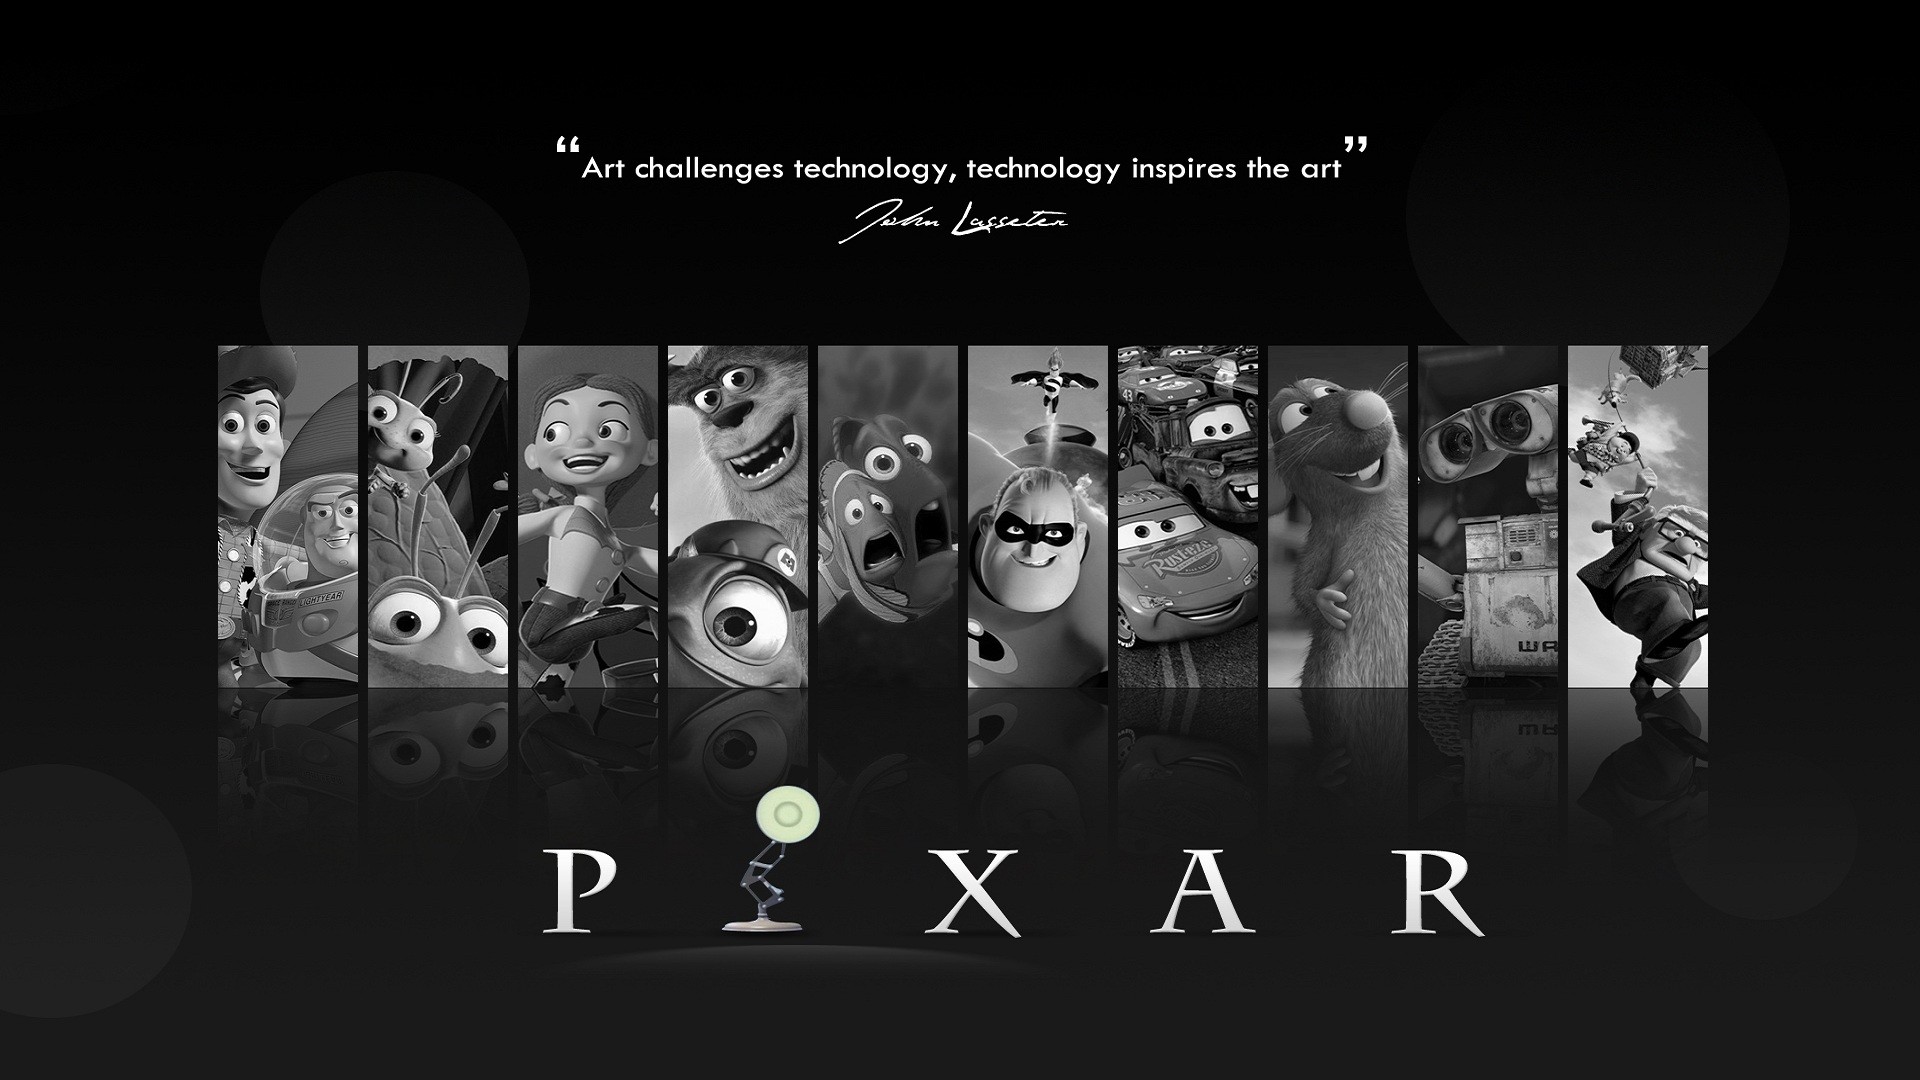 movies, Pixar Animation Studios, Toy Story, Monsters, Inc., Cars (movie), WALL·E Wallpaper